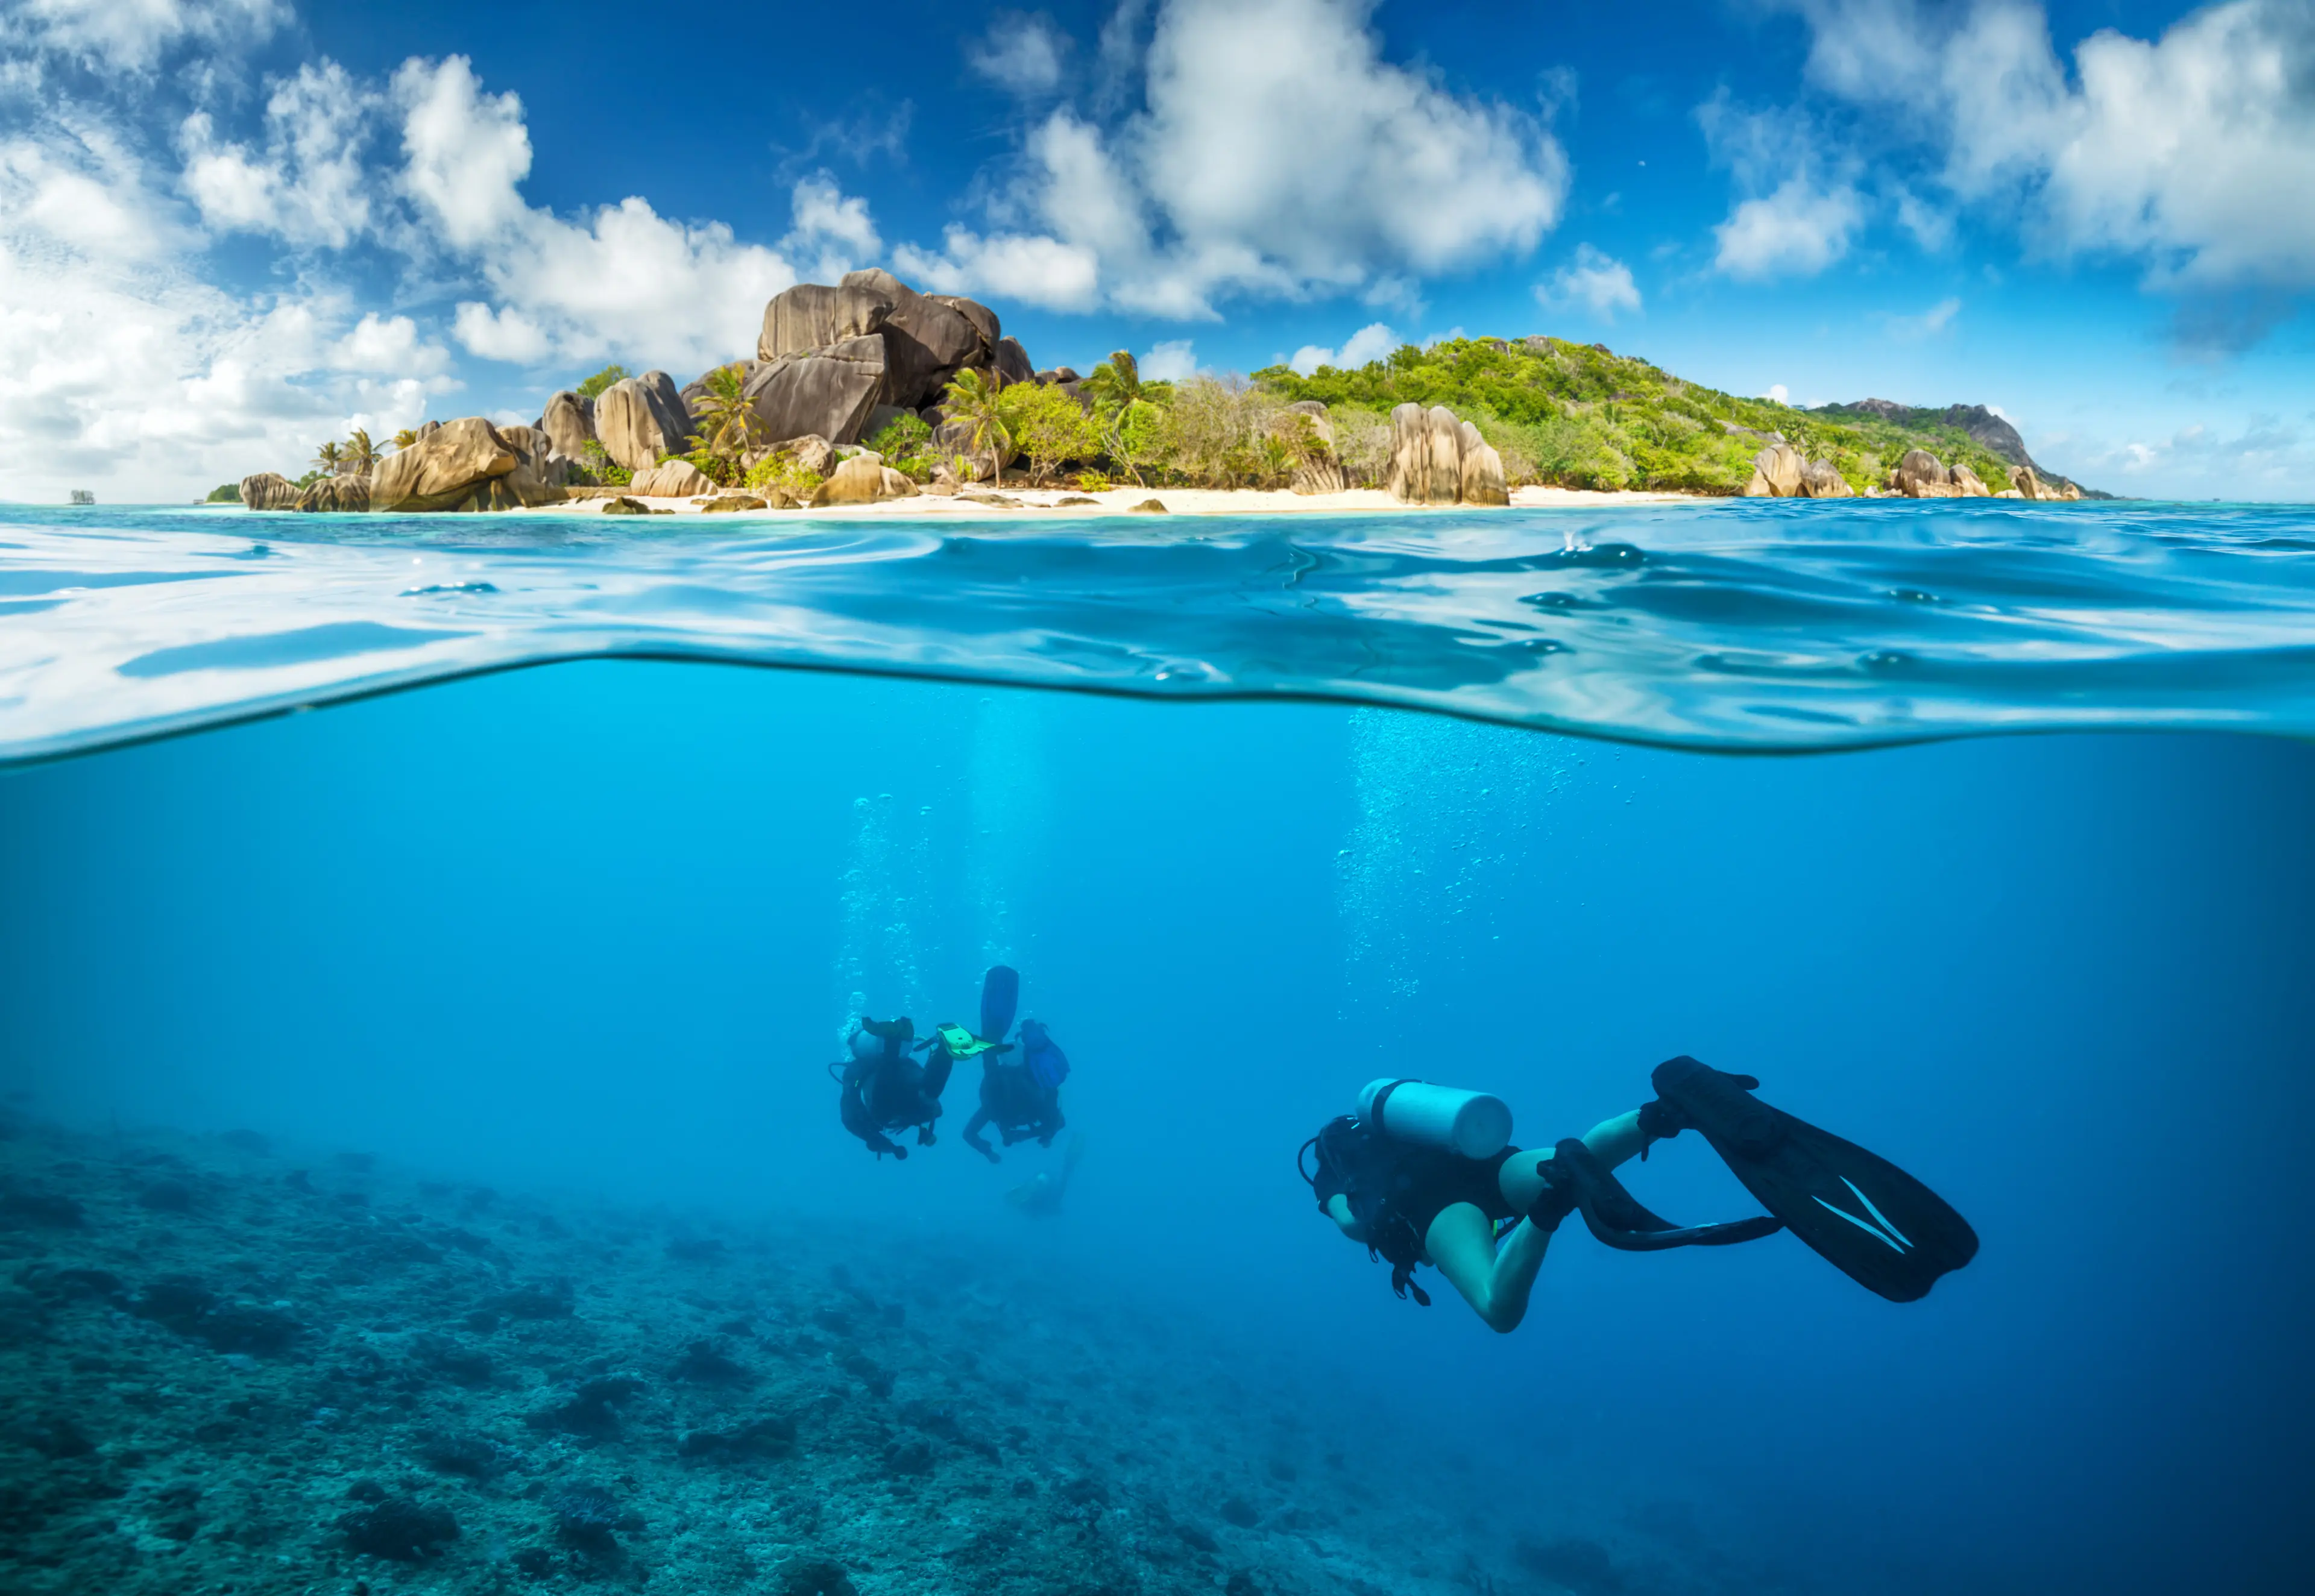 4-Day Dream Vacation: Discovering Seychelles Beauty